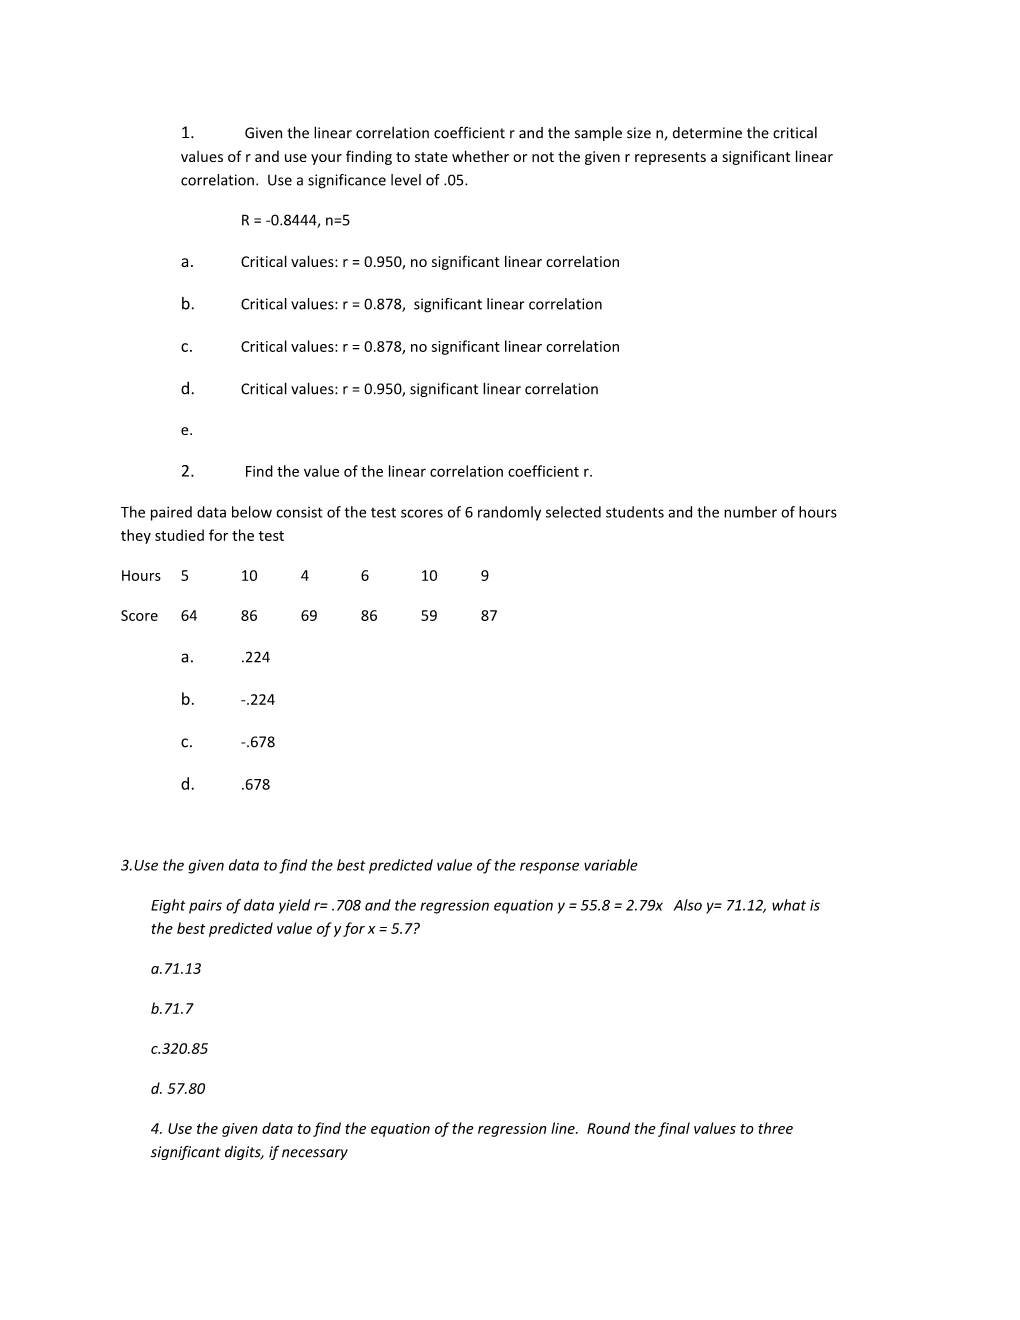 Given the Linear Correlation Coefficient R and the Sample Size N, Determine the Critical